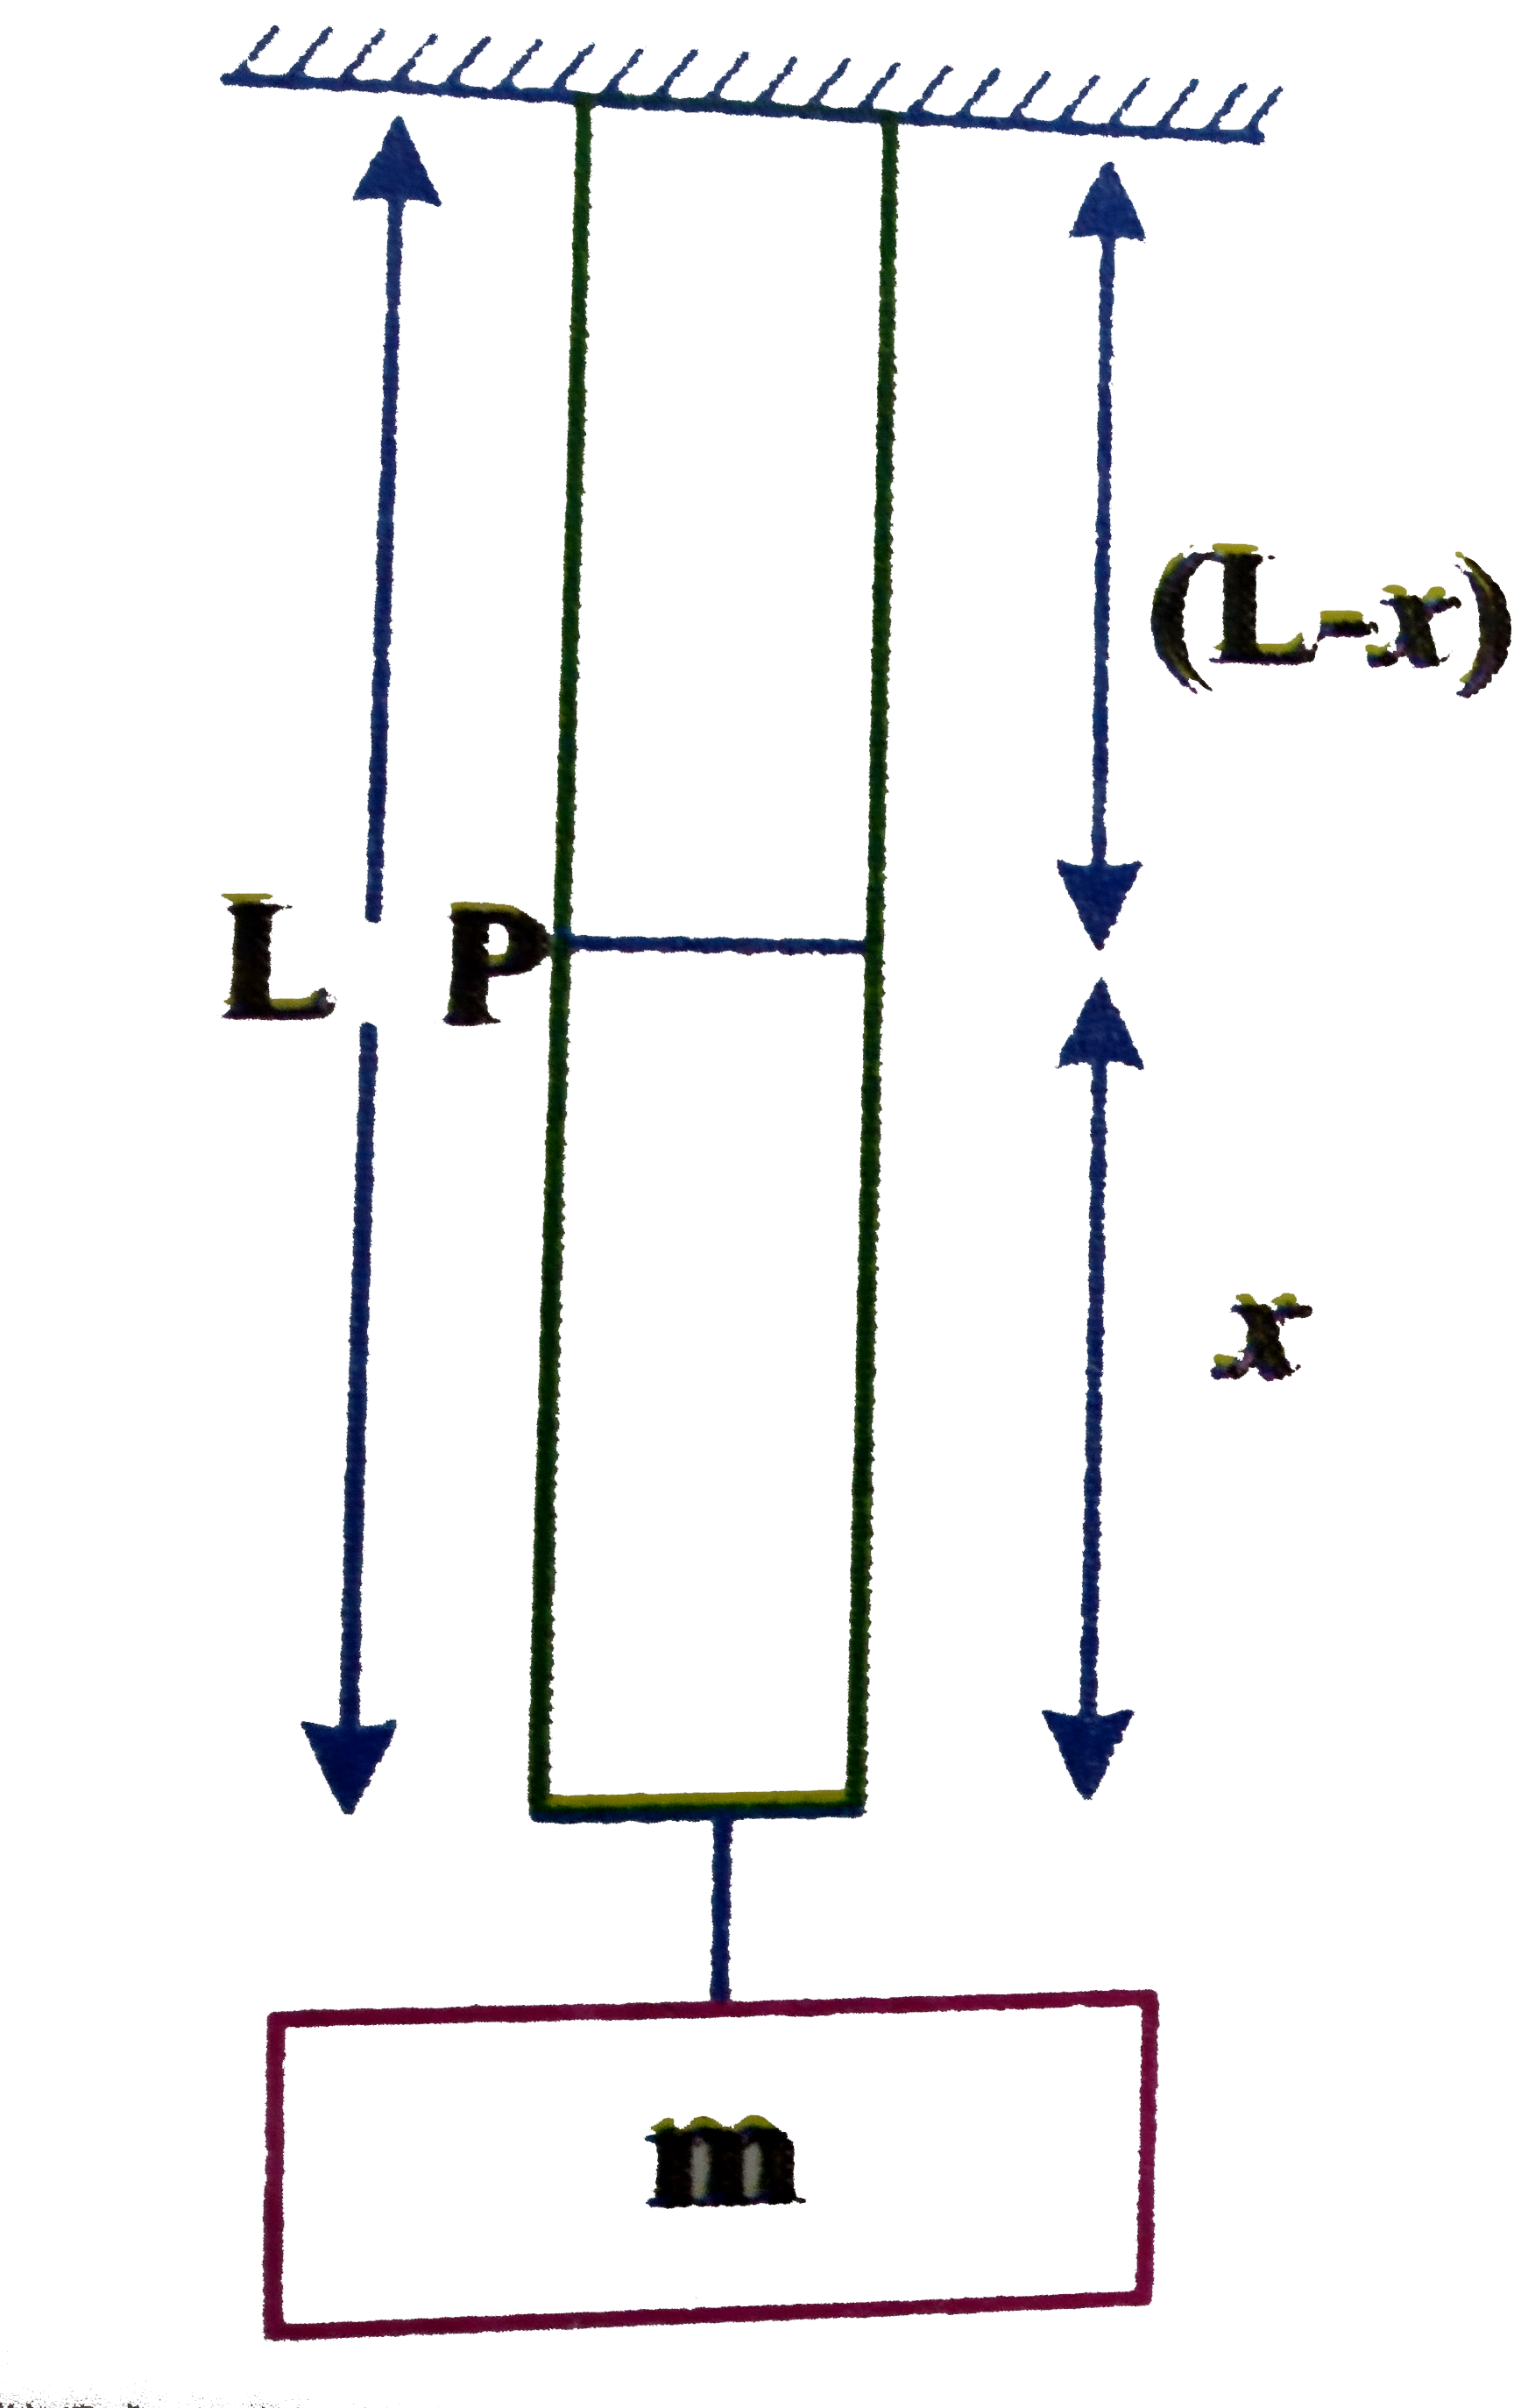 One end of  a uniform wire of length  'L' and mass 'M' is attached rigidly to a point in the roof and a load of a mass 'm' is suspended from its lower end. If A is the area of cross-section of the wire then  the stress in the wire at height  'x' from its lower end (x lt L) is